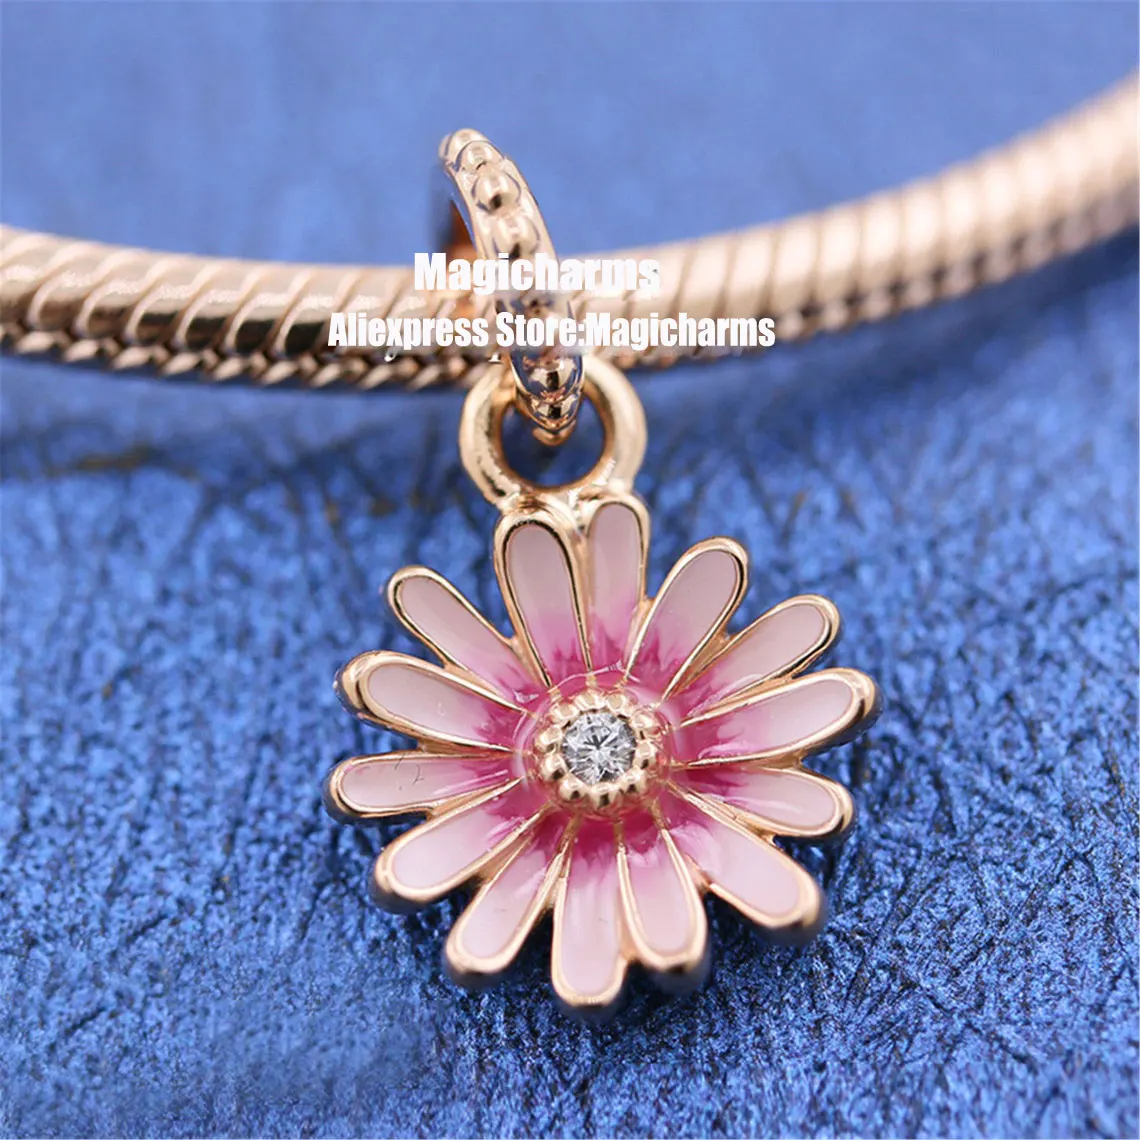 

925 Sterling Silver & Rose Gold Plated Pink Daisy Flower Dangle Charm Bead Fits All European Pandora Bracelets Necklaces